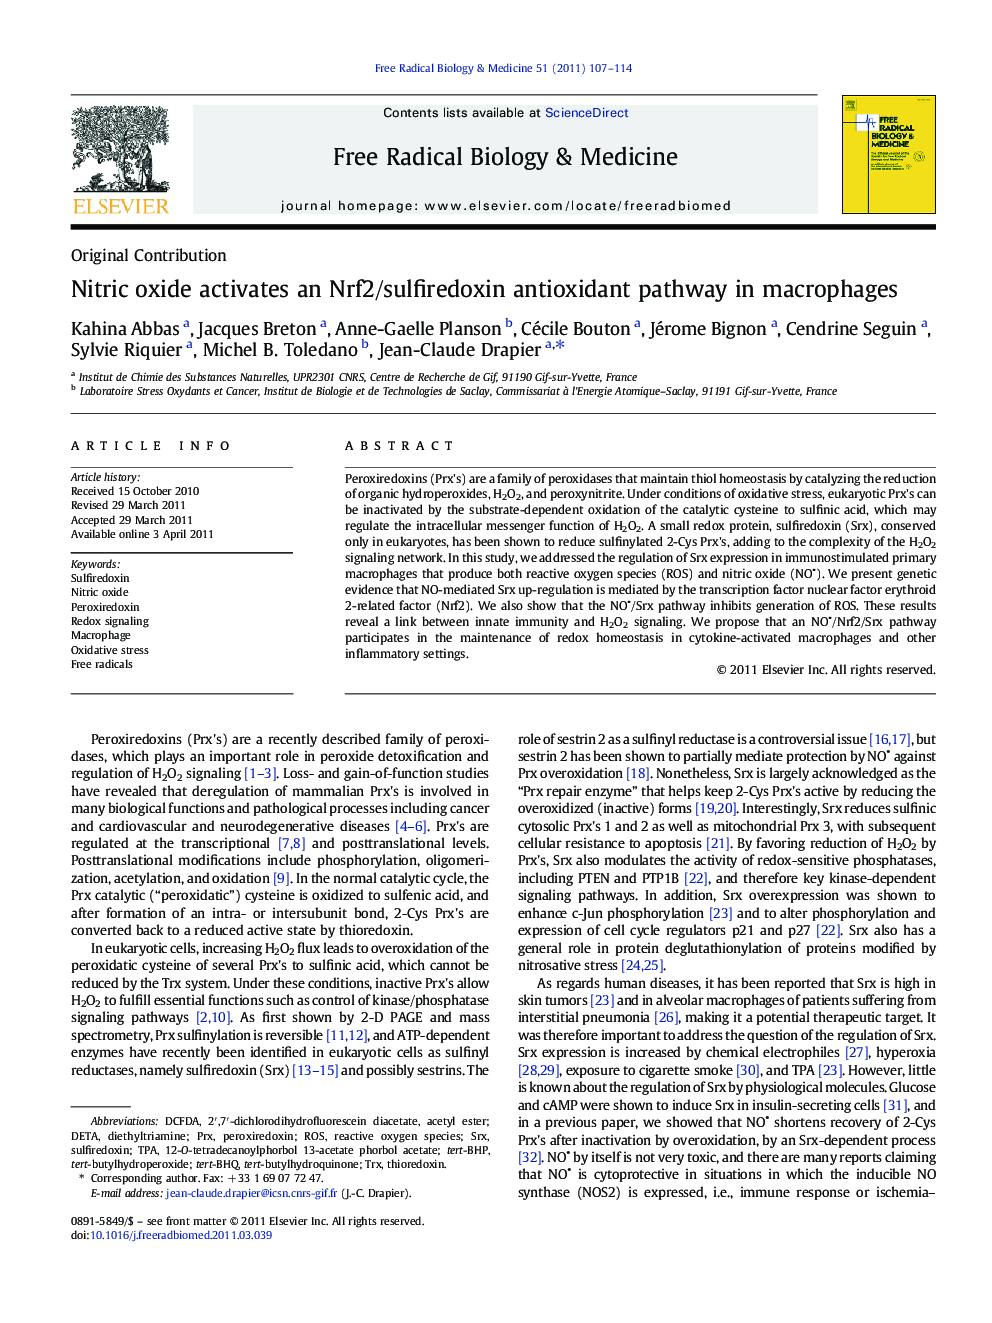 Nitric oxide activates an Nrf2/sulfiredoxin antioxidant pathway in macrophages